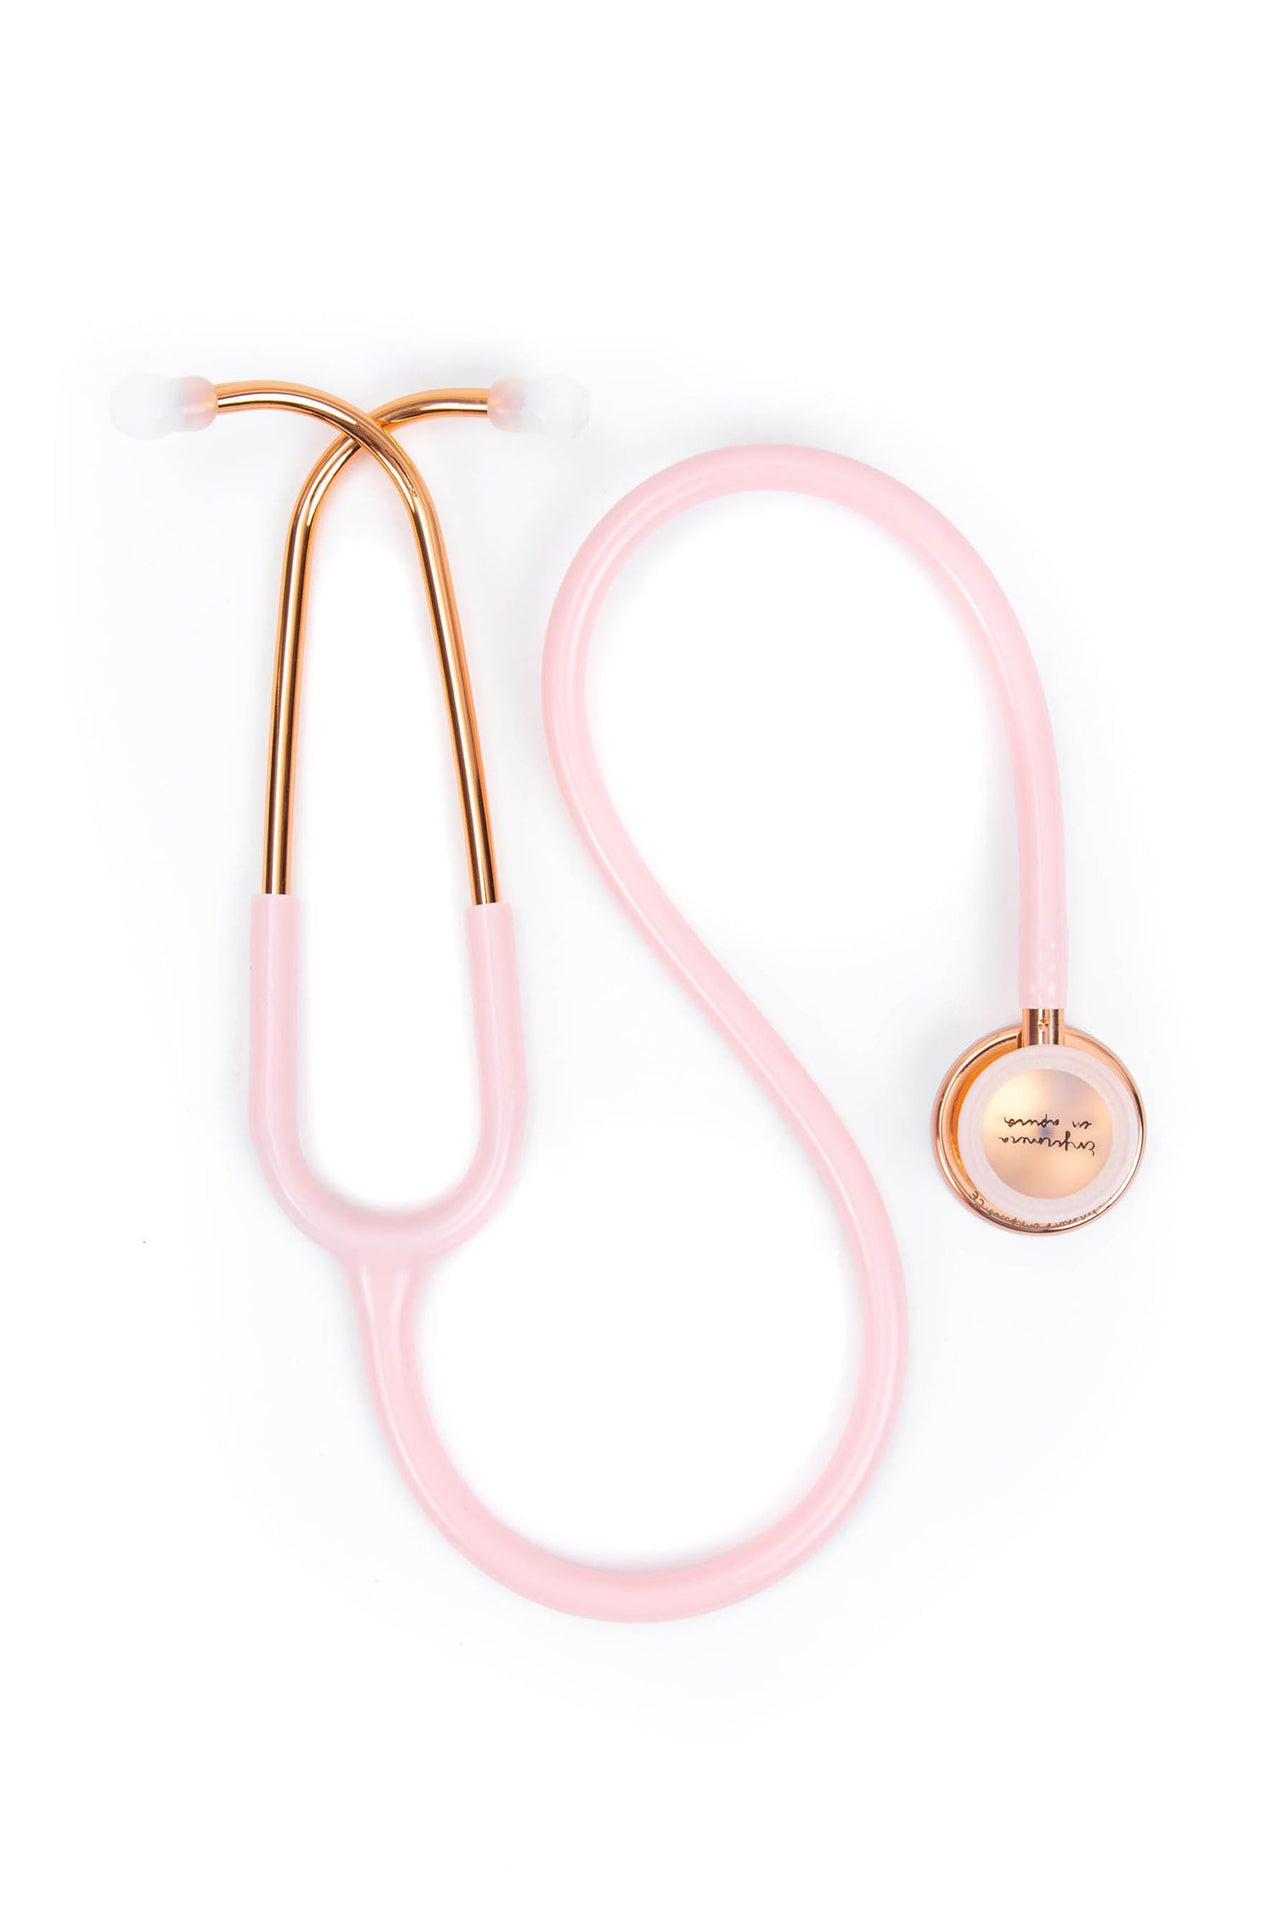 STETHOSCOPE CLASSIC EDITION ROSE GOLD - LIGHT PINK